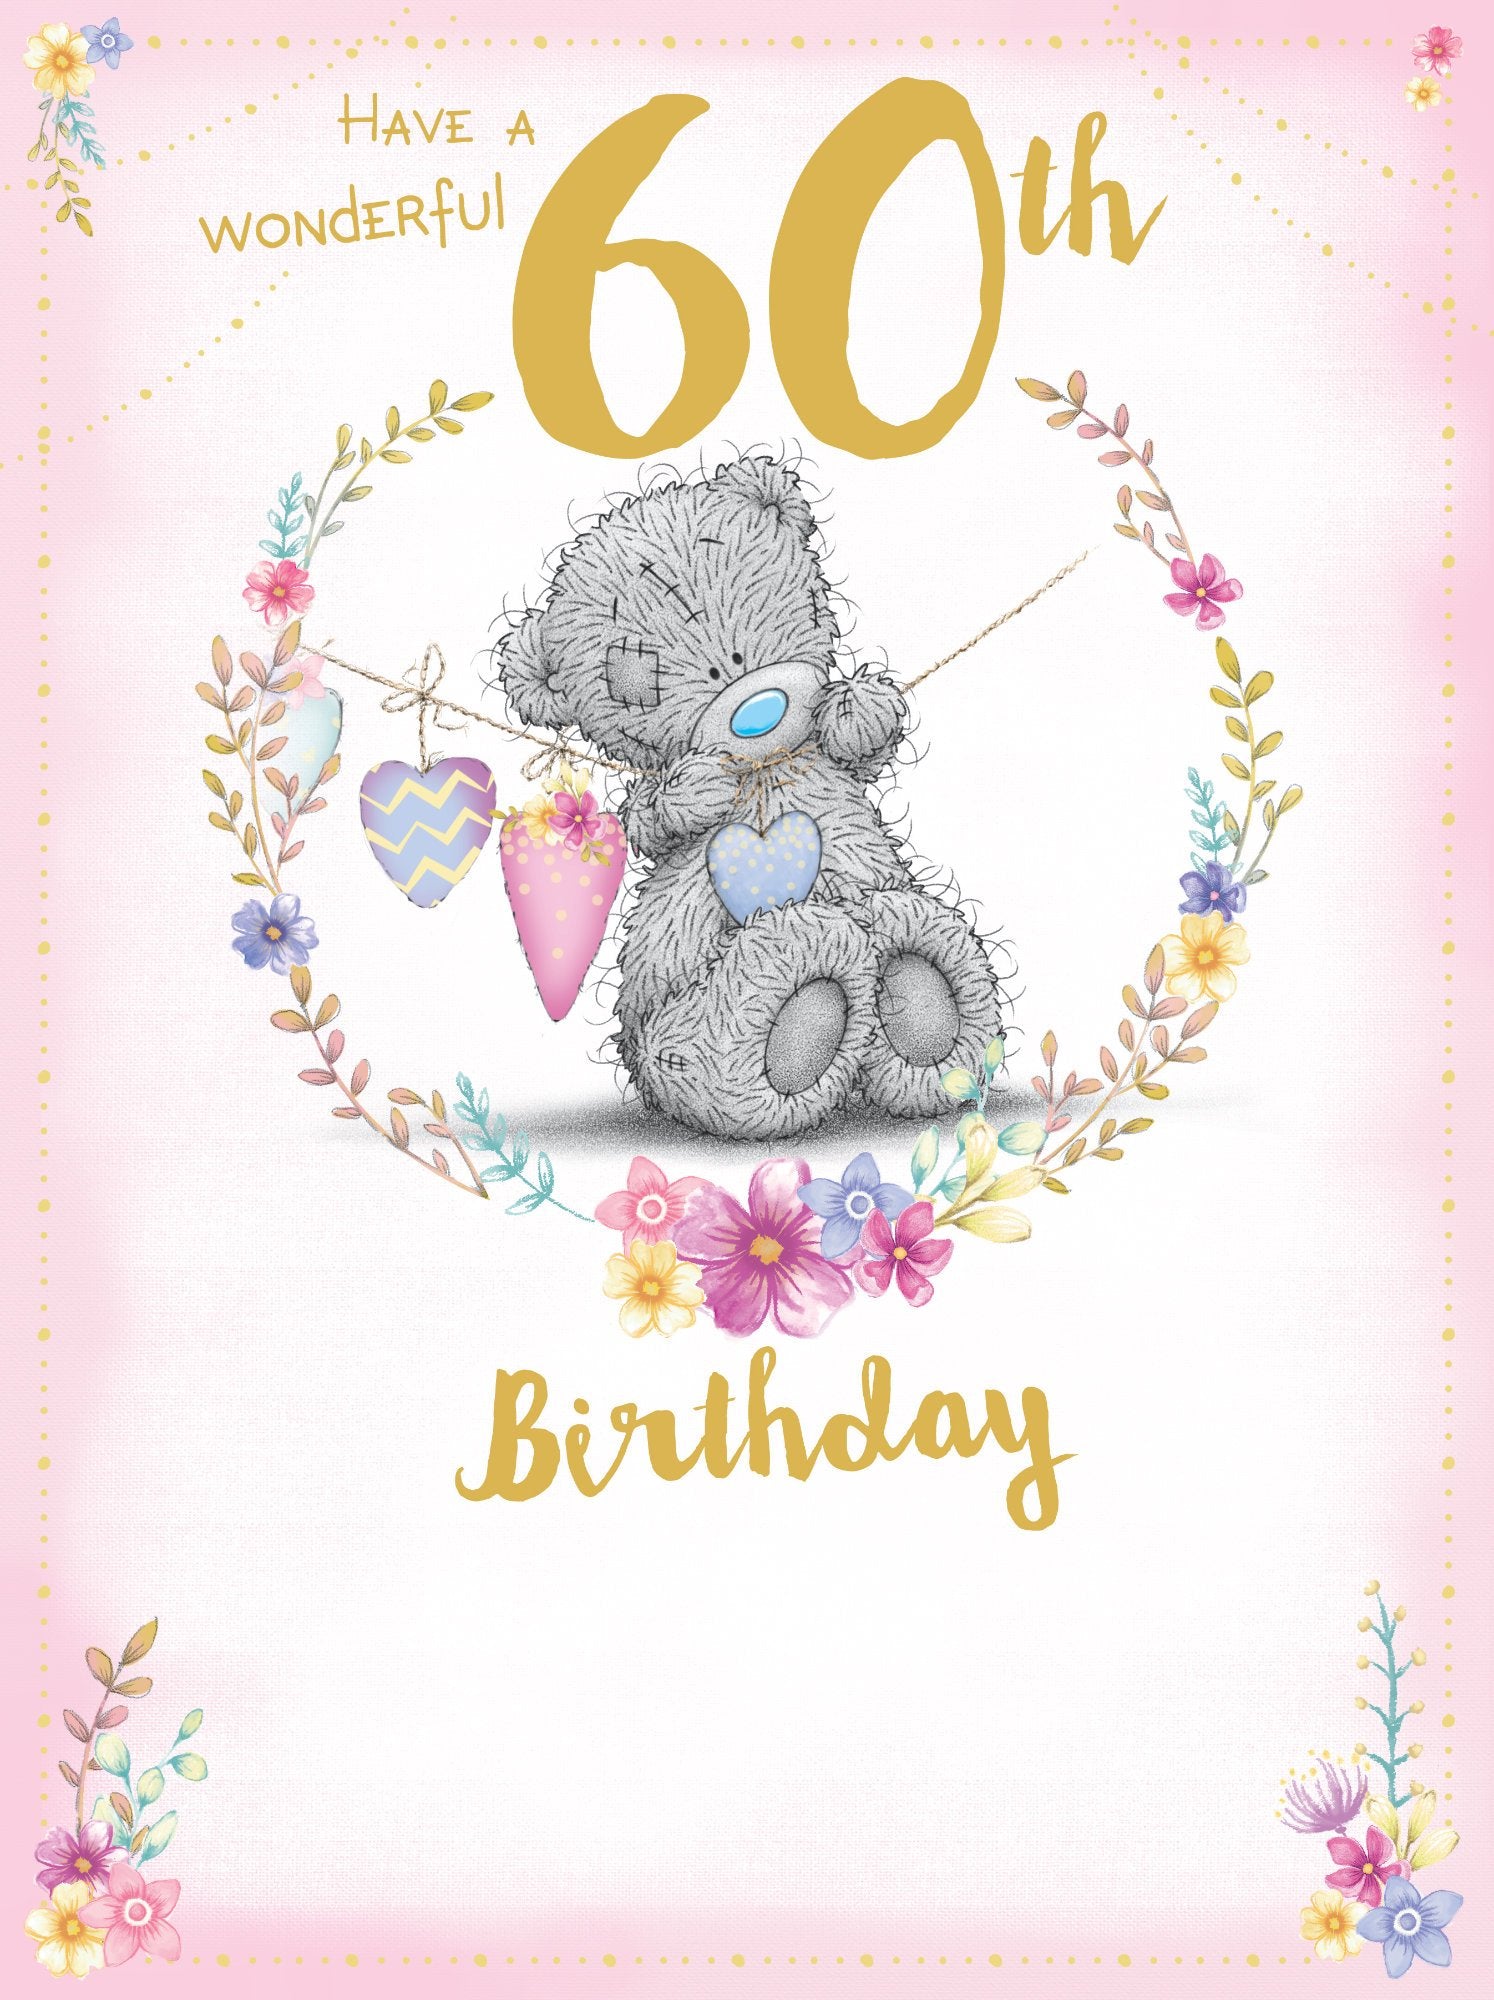 Photograph of 60th Birthday Teddy Sitting Greetings Card at Nicole's Shop